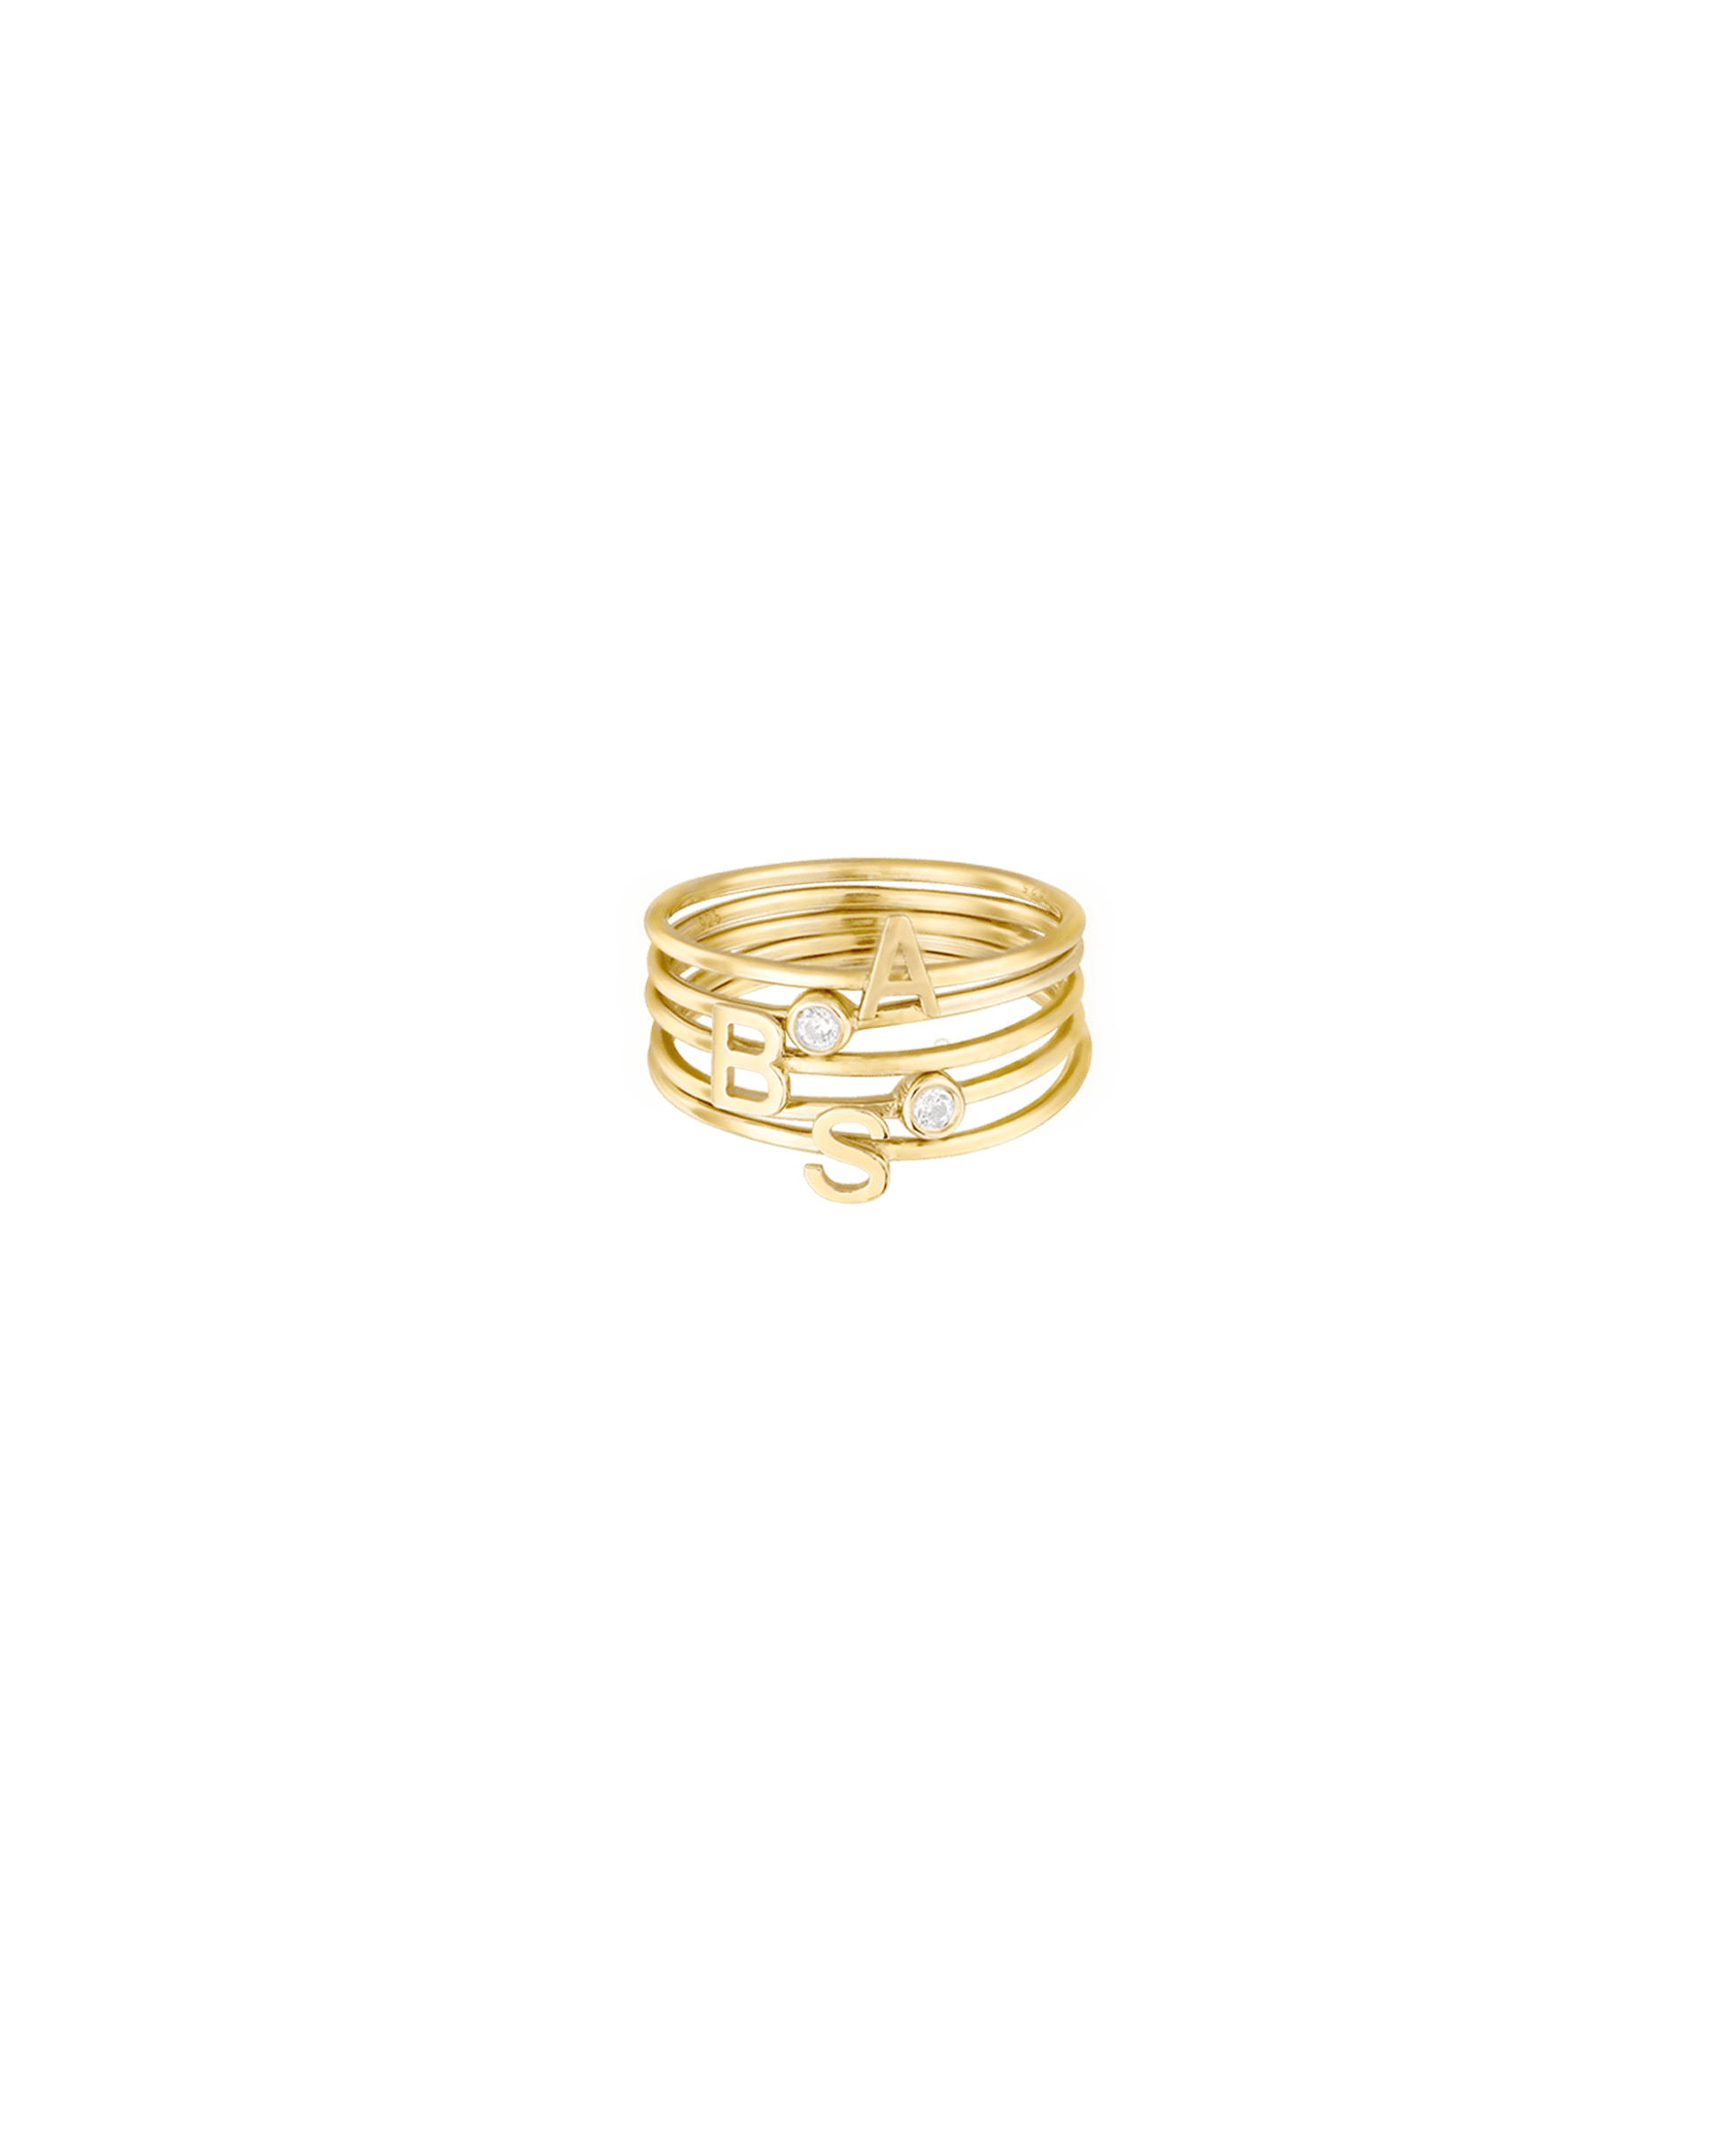 Stackable Initial Ring(s) - 14K Yellow Gold Rings magal-dev 1 Ring US 4 